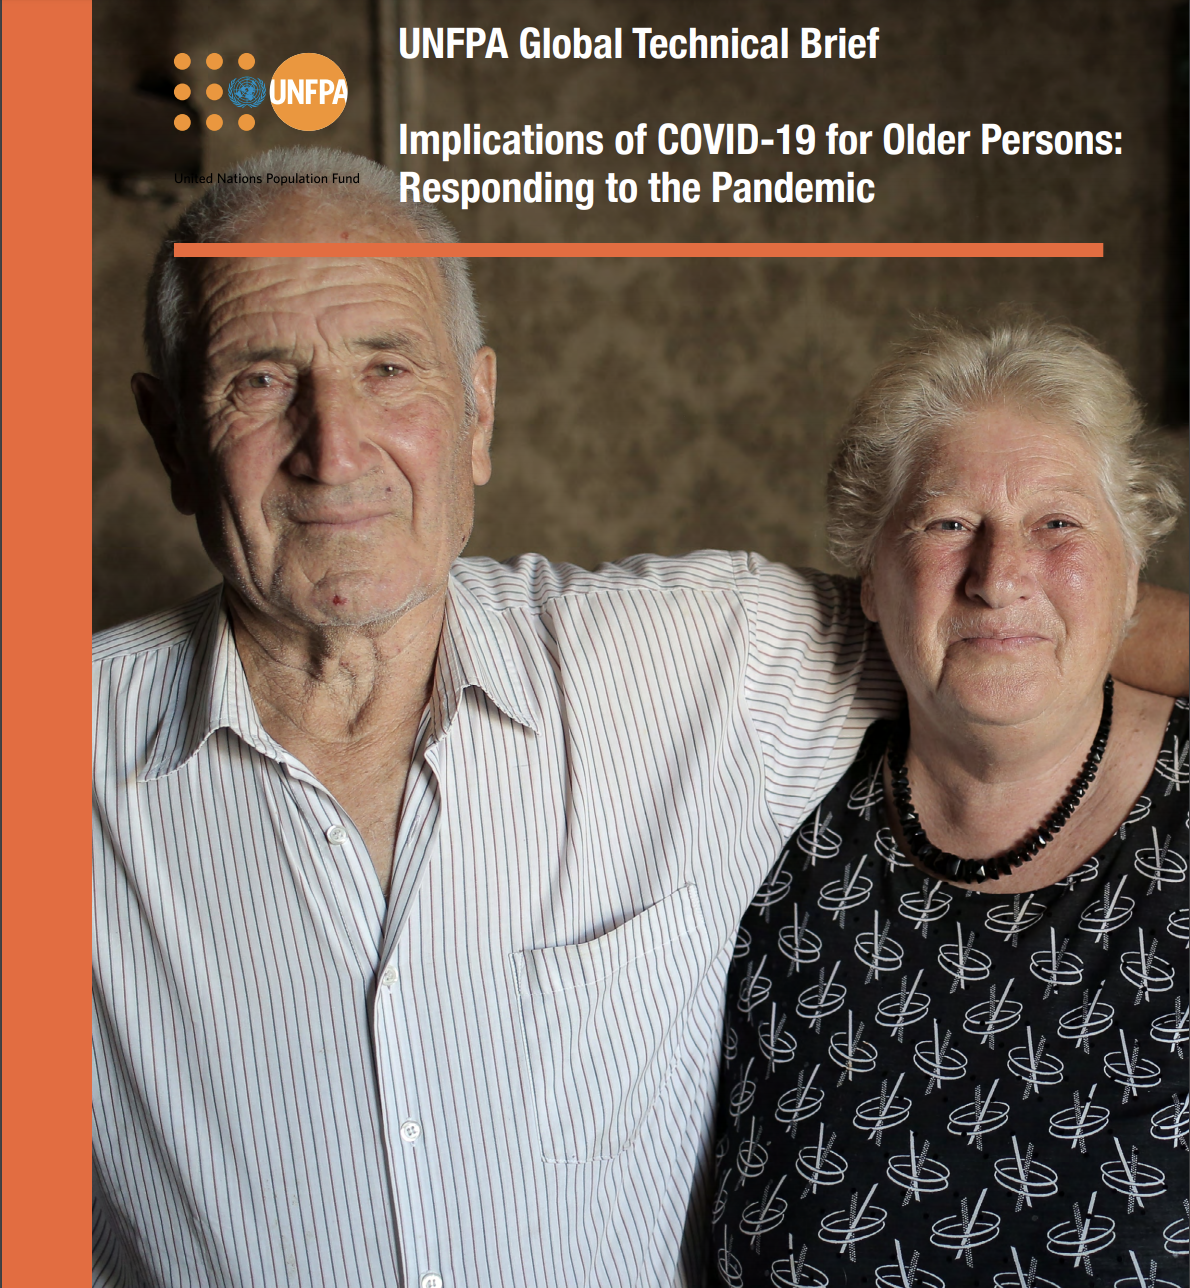 Implications of COVID-19 for Older Persons: Responding to the Pandemic